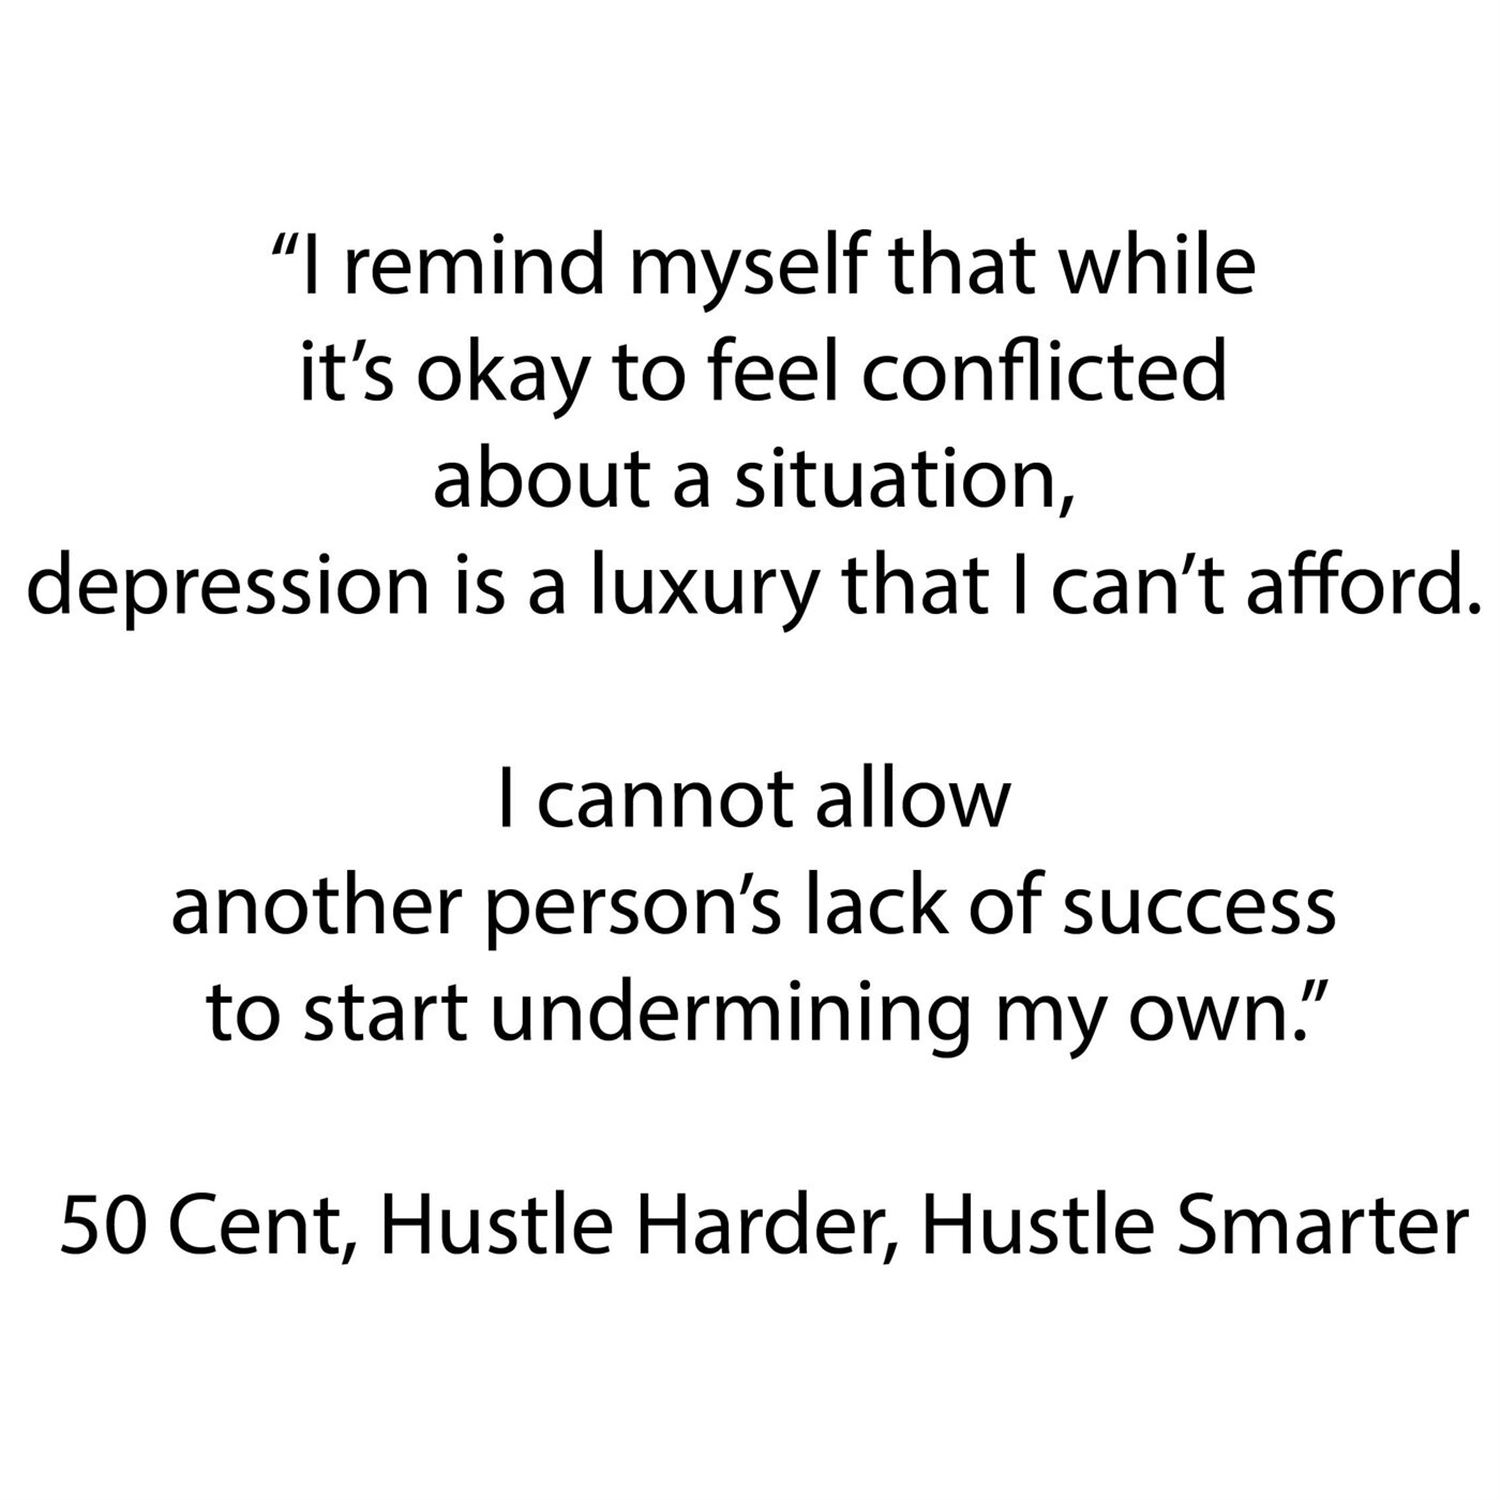 Depression and 50 Cent